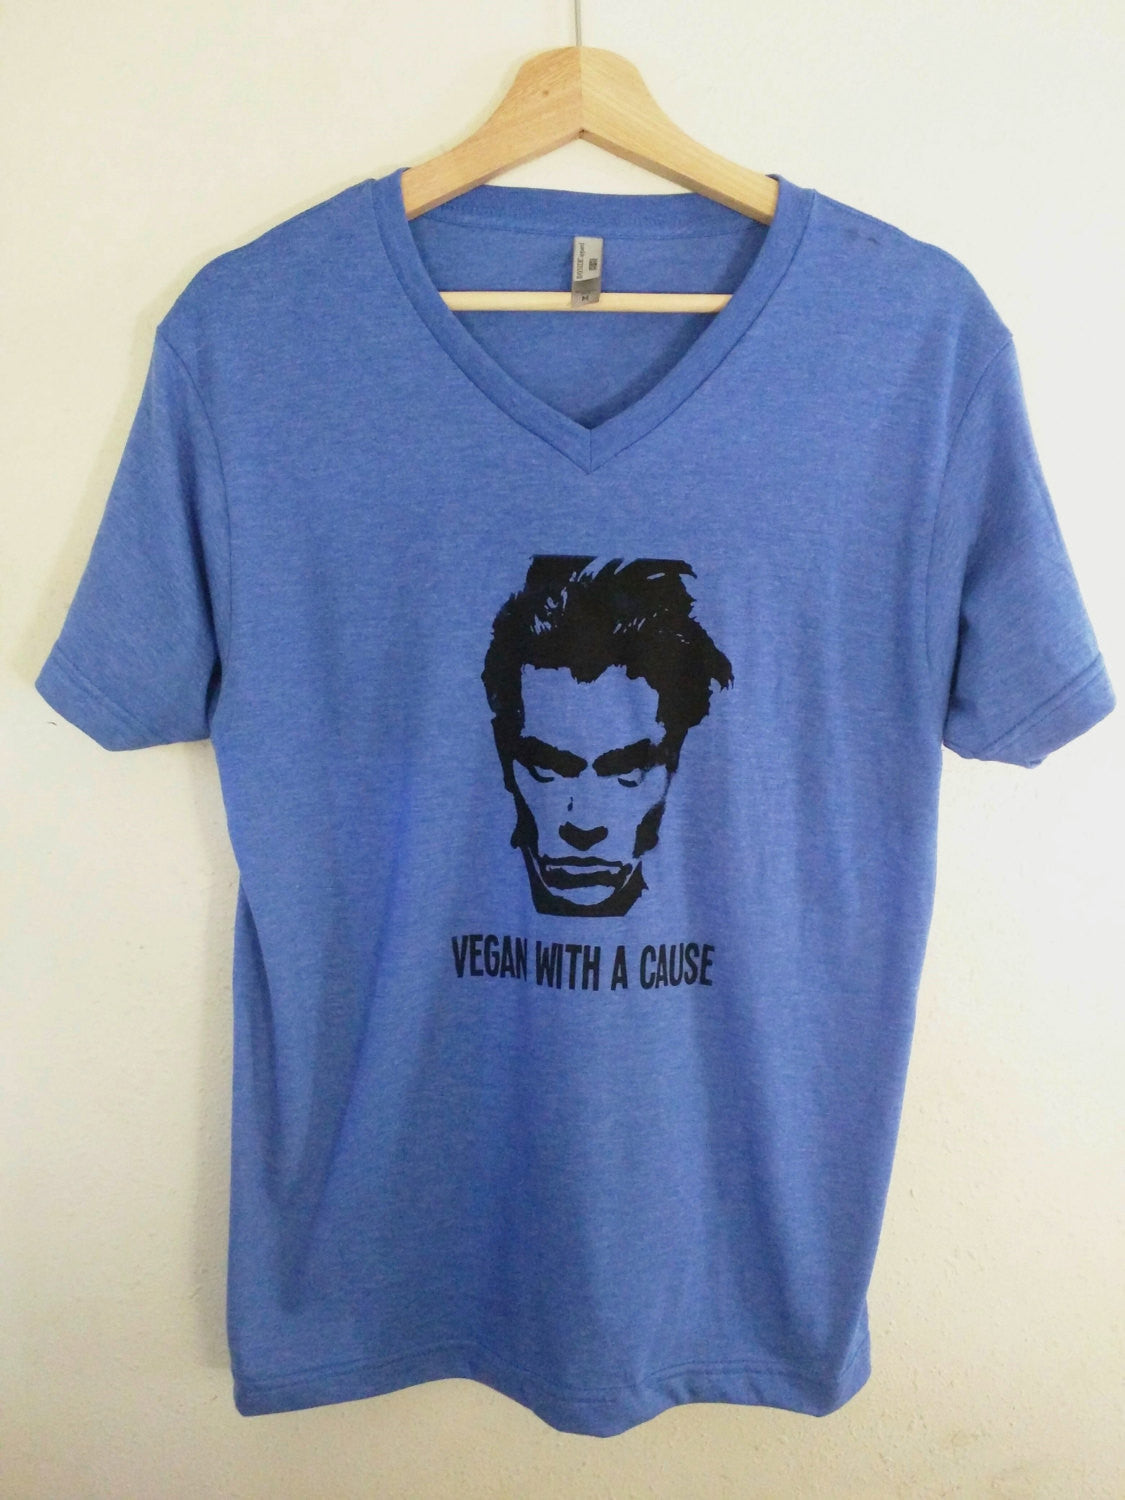 Organic Made in USA T-shirt "Vegan with a Cause" featuring River Phoenix